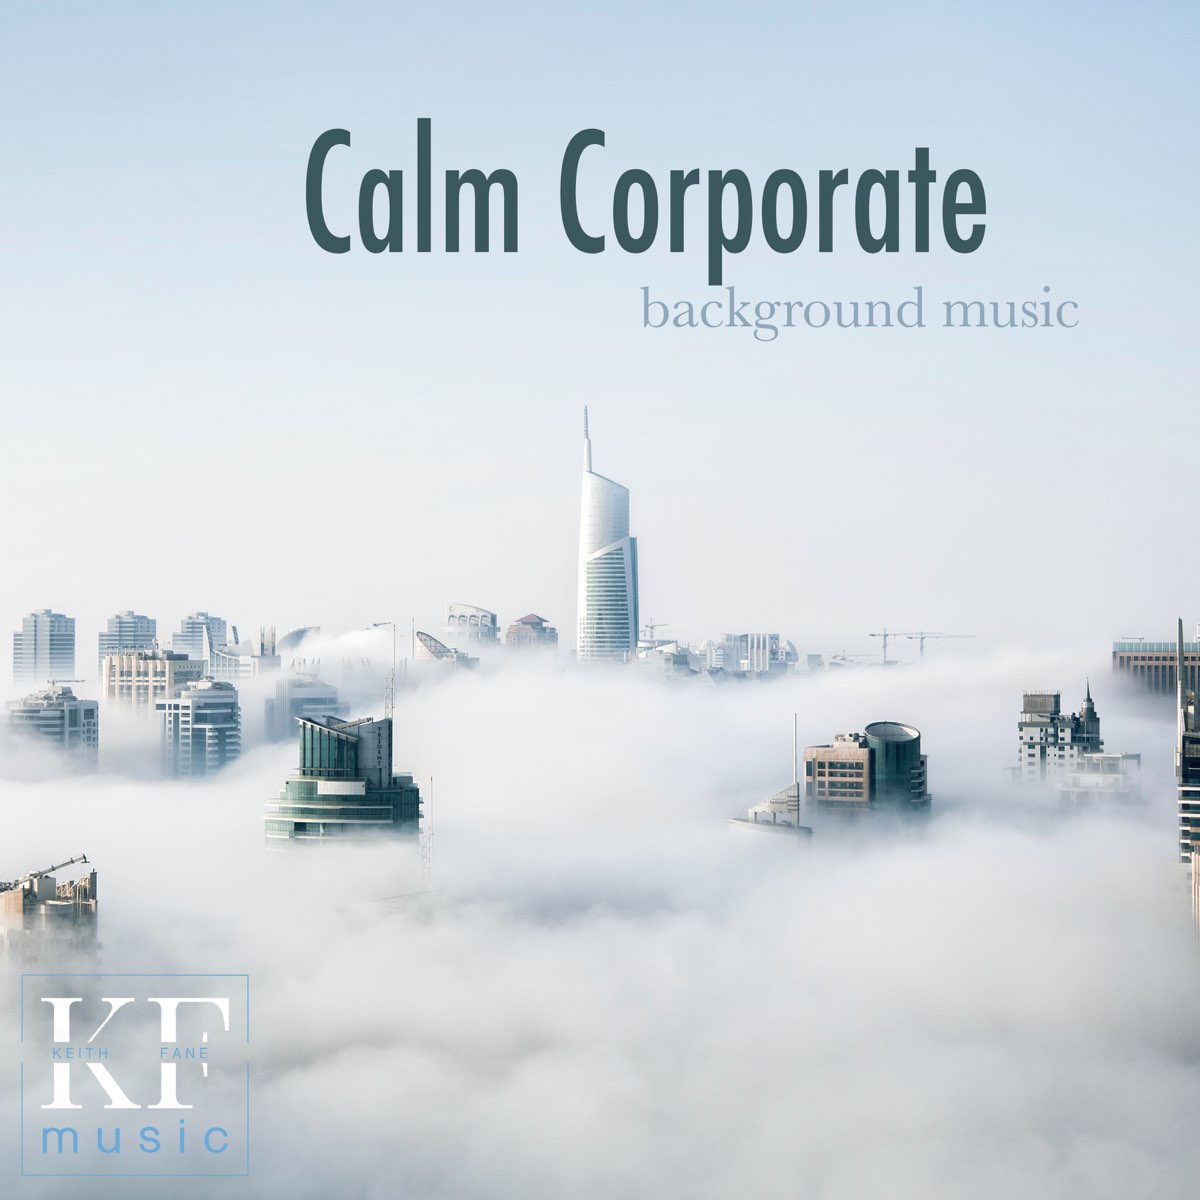 Calm Corporate - Background Music for Store by Keith Fane on Apple Music